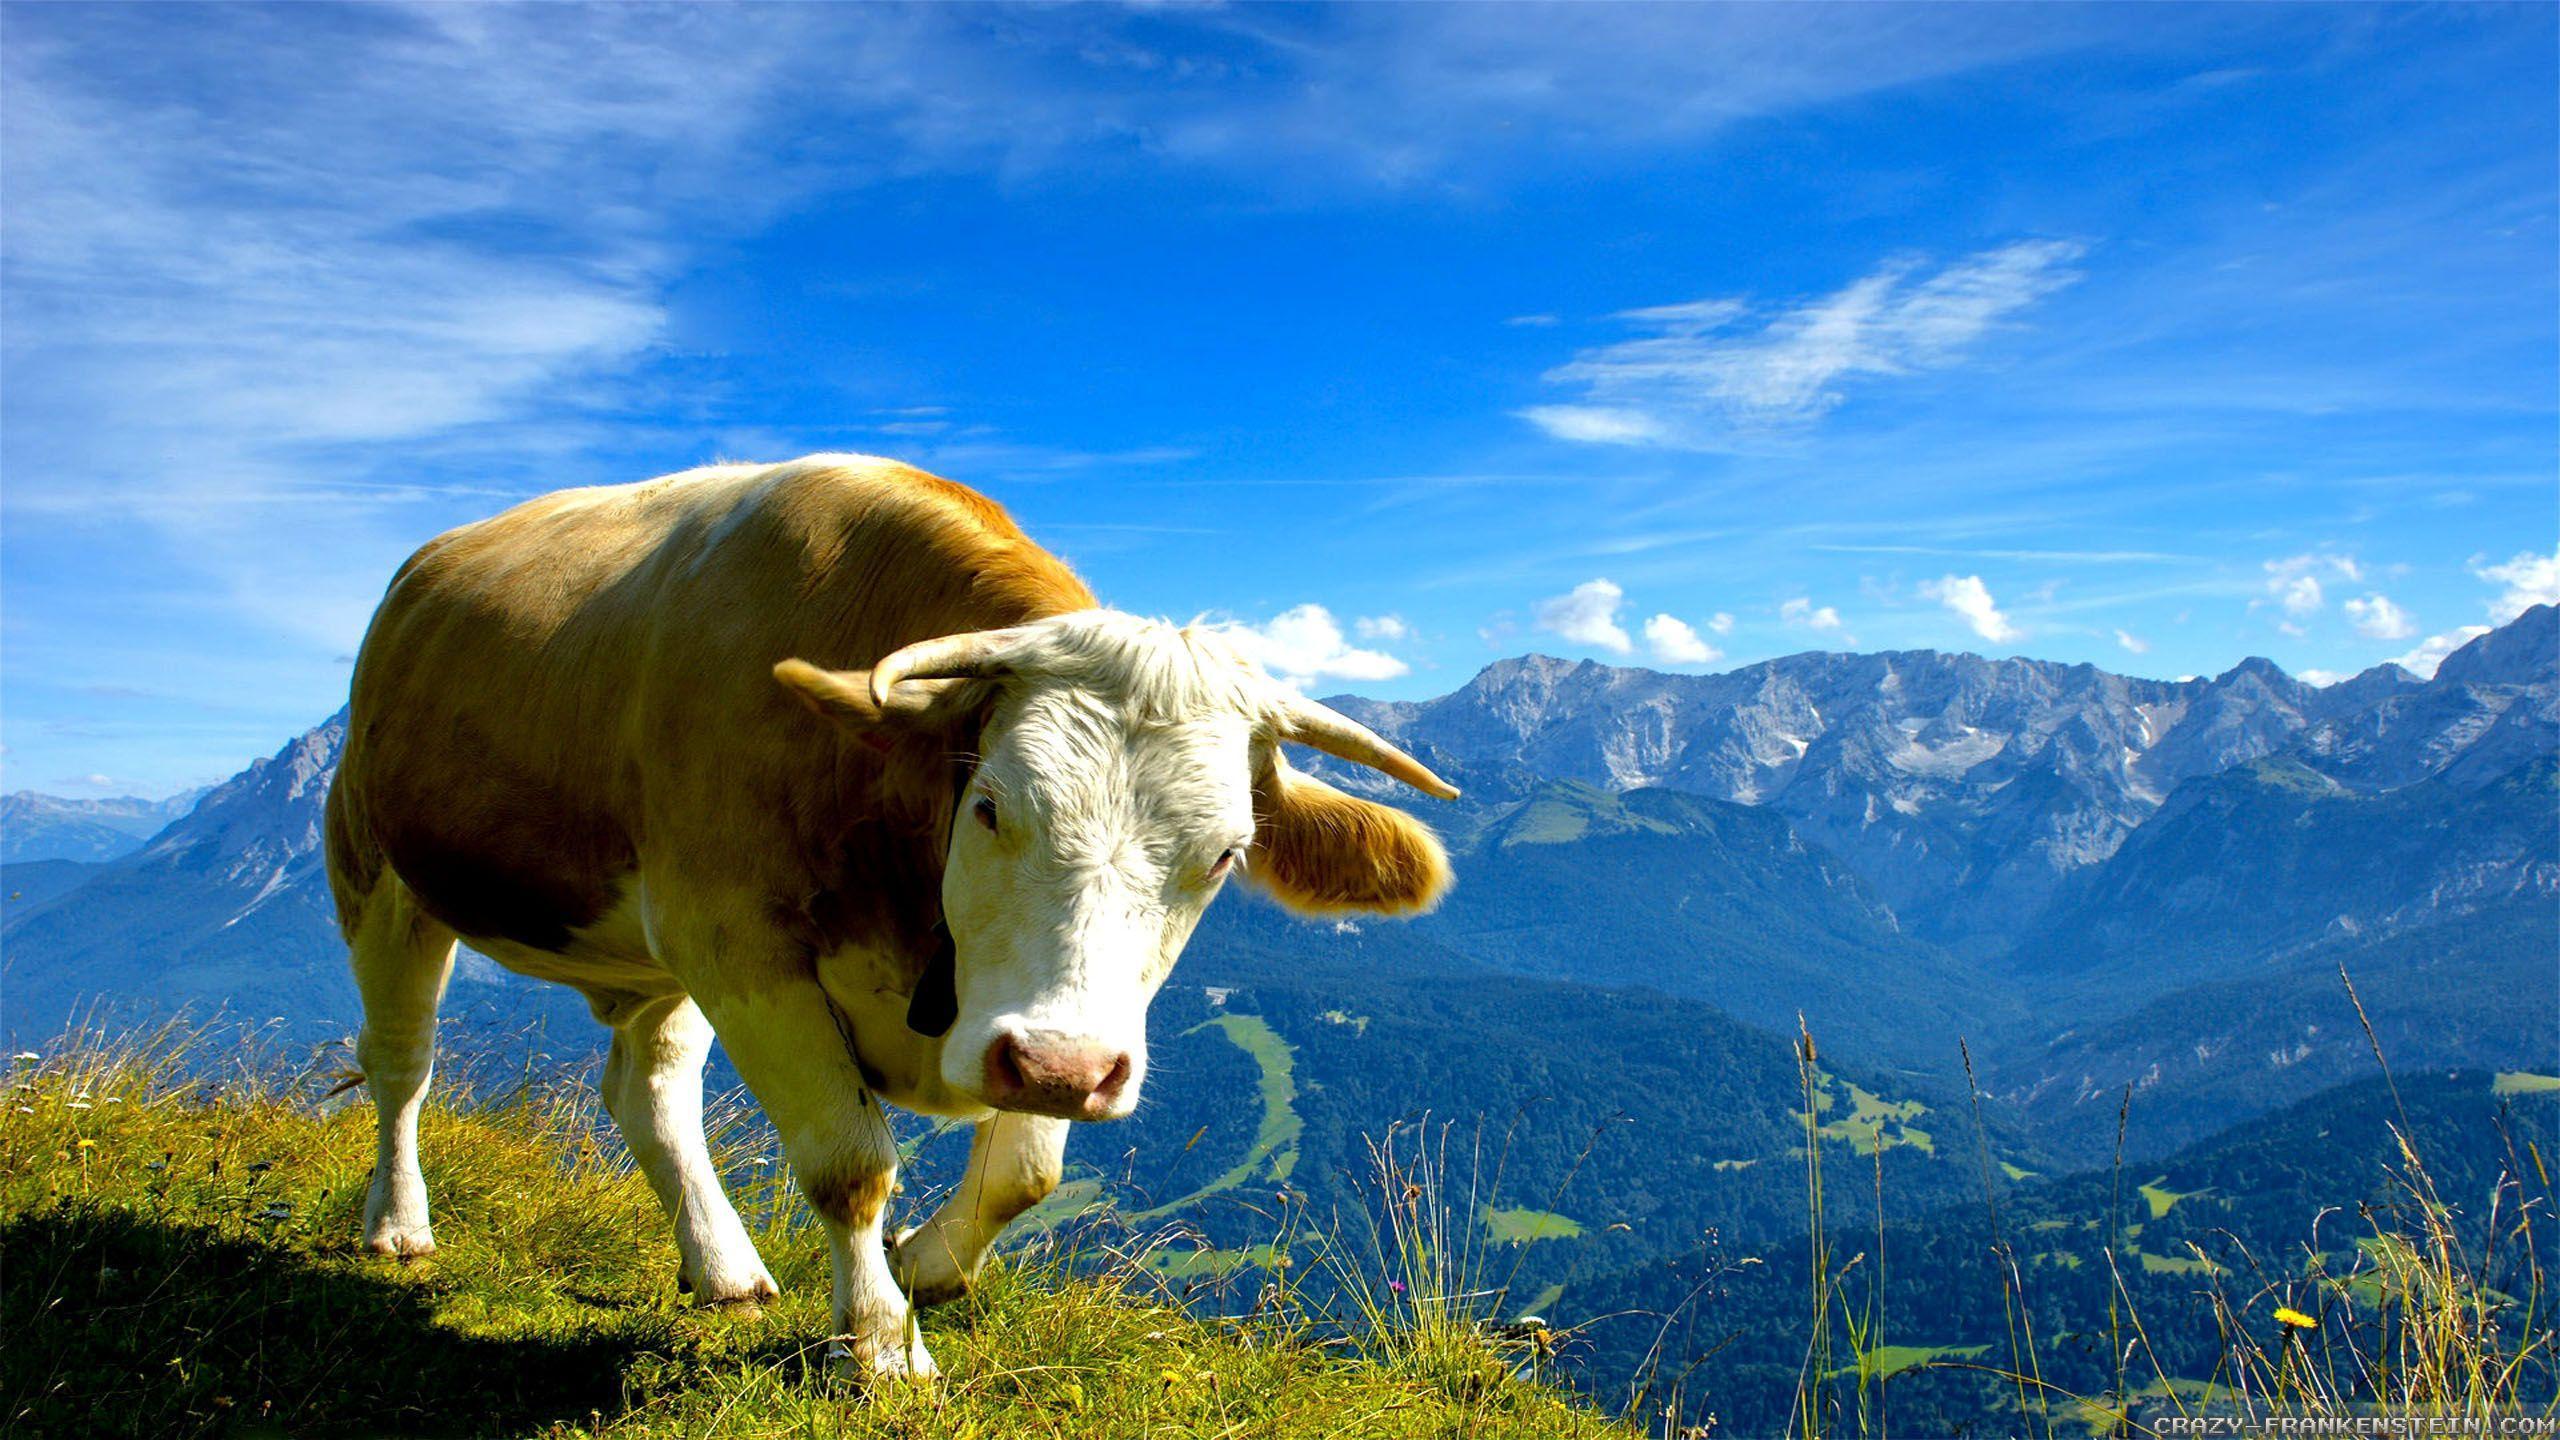 Cow In The Mountains HD Wallpaper. Background Imagex1440